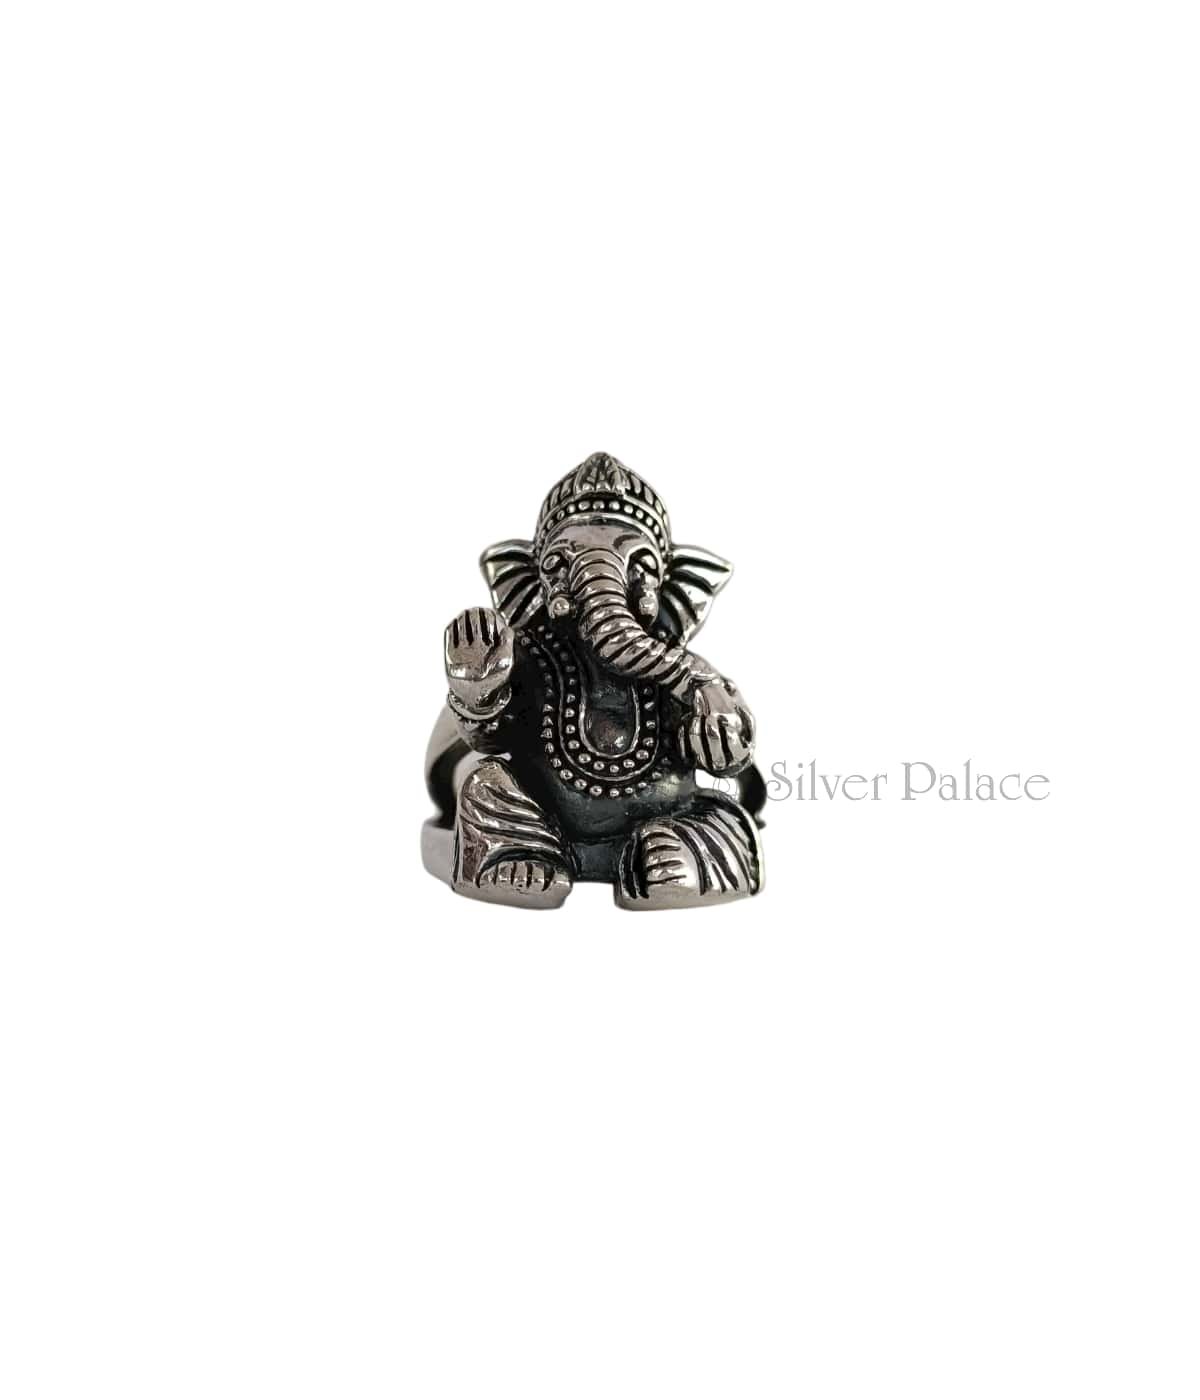 92.5 OXIDISED SILVER RELAXING LORD GANESH FINGER RING FOR MEN